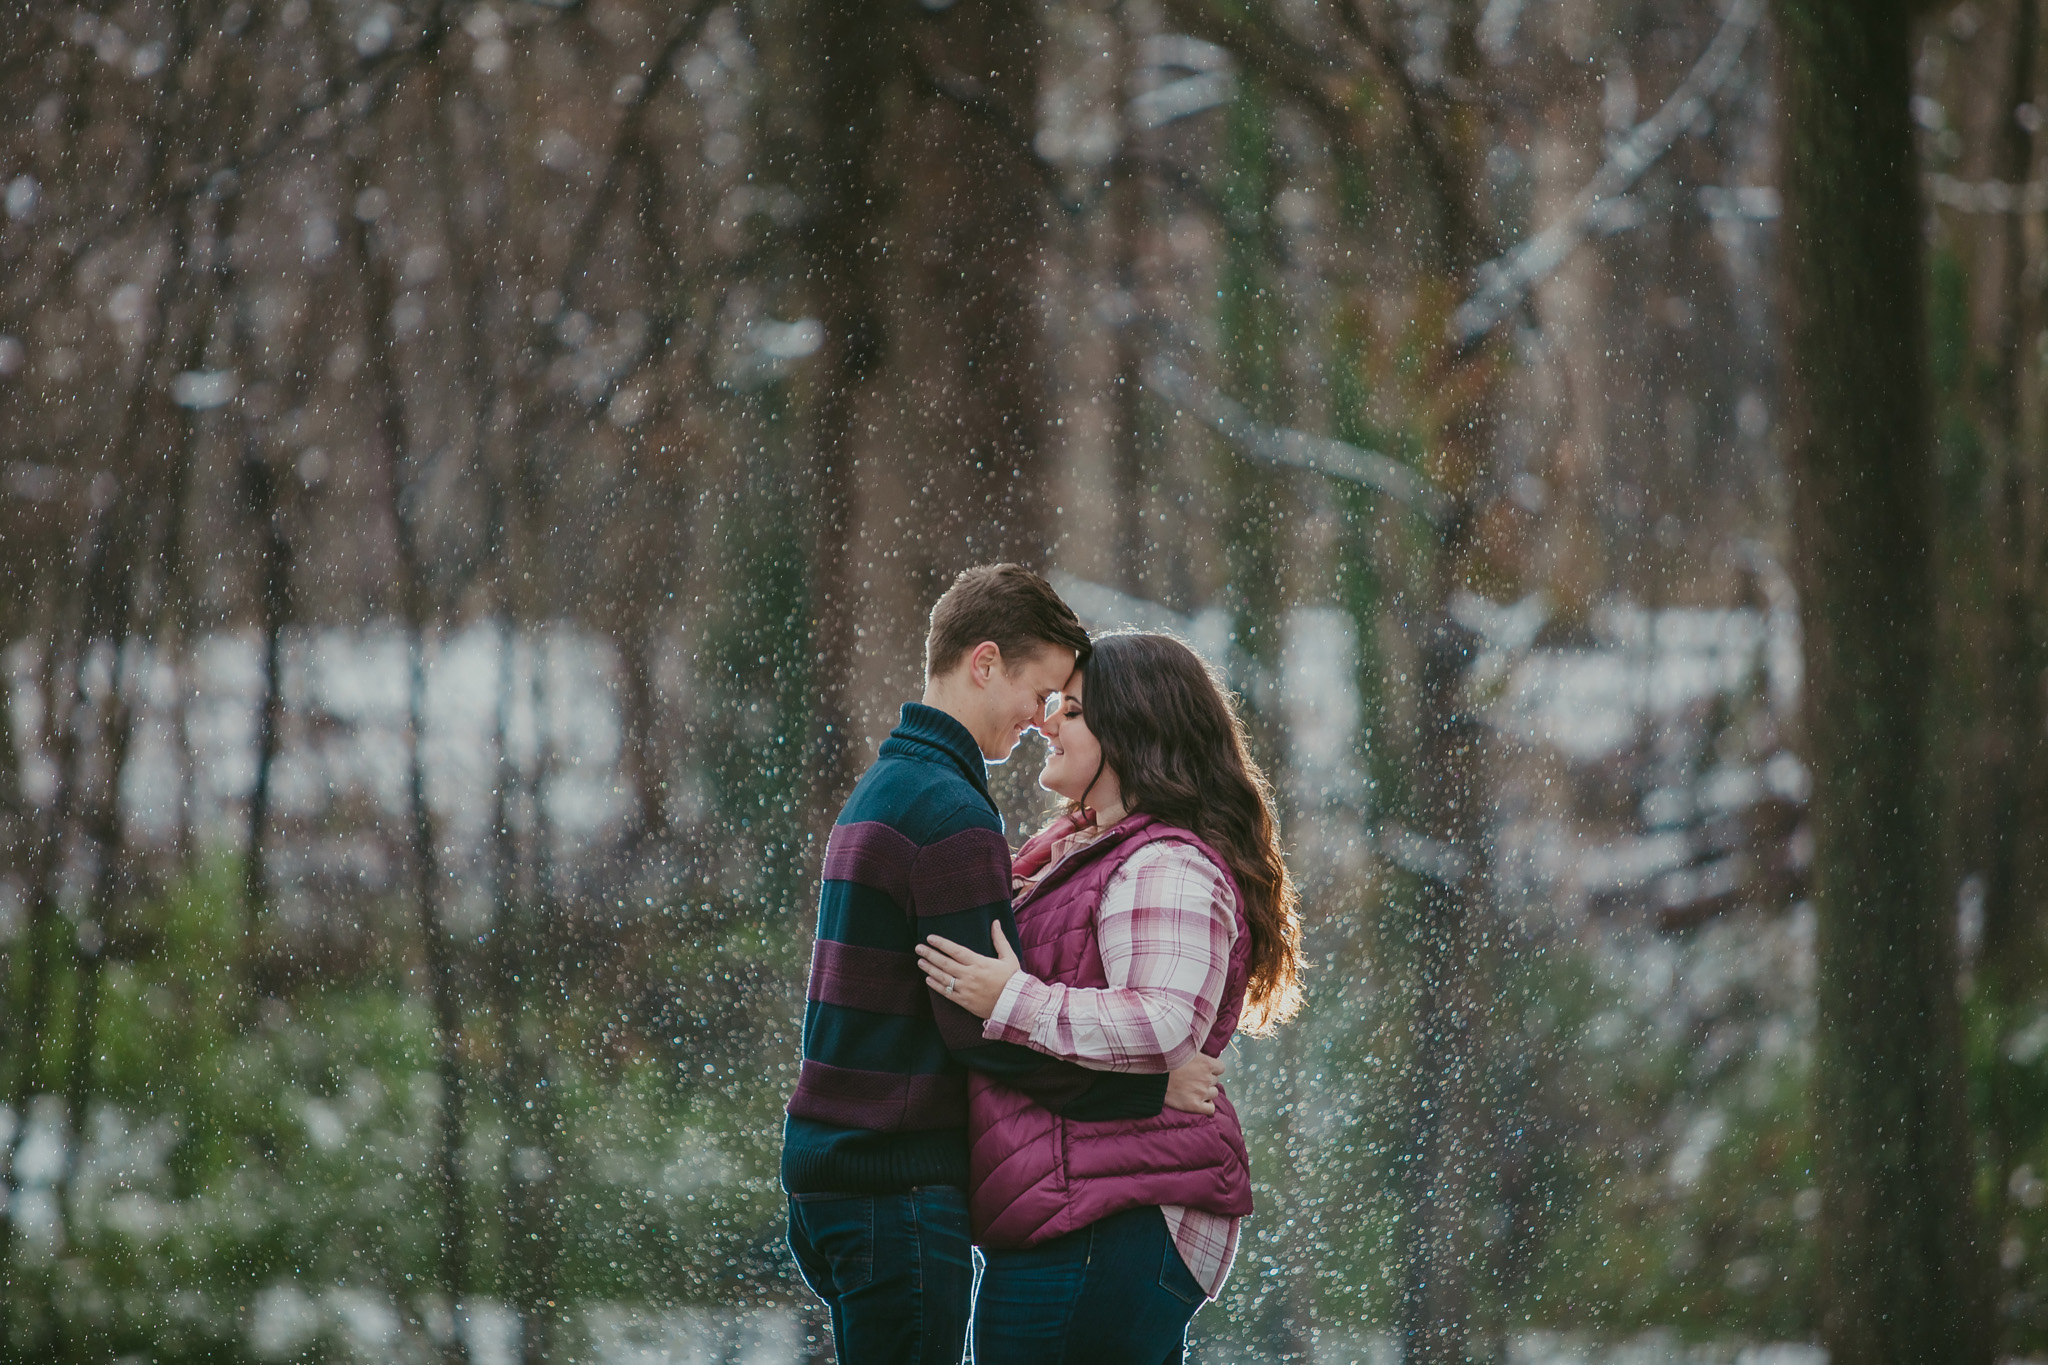 A snowy engagement session at Mac Anderson Park in Statesville, NC